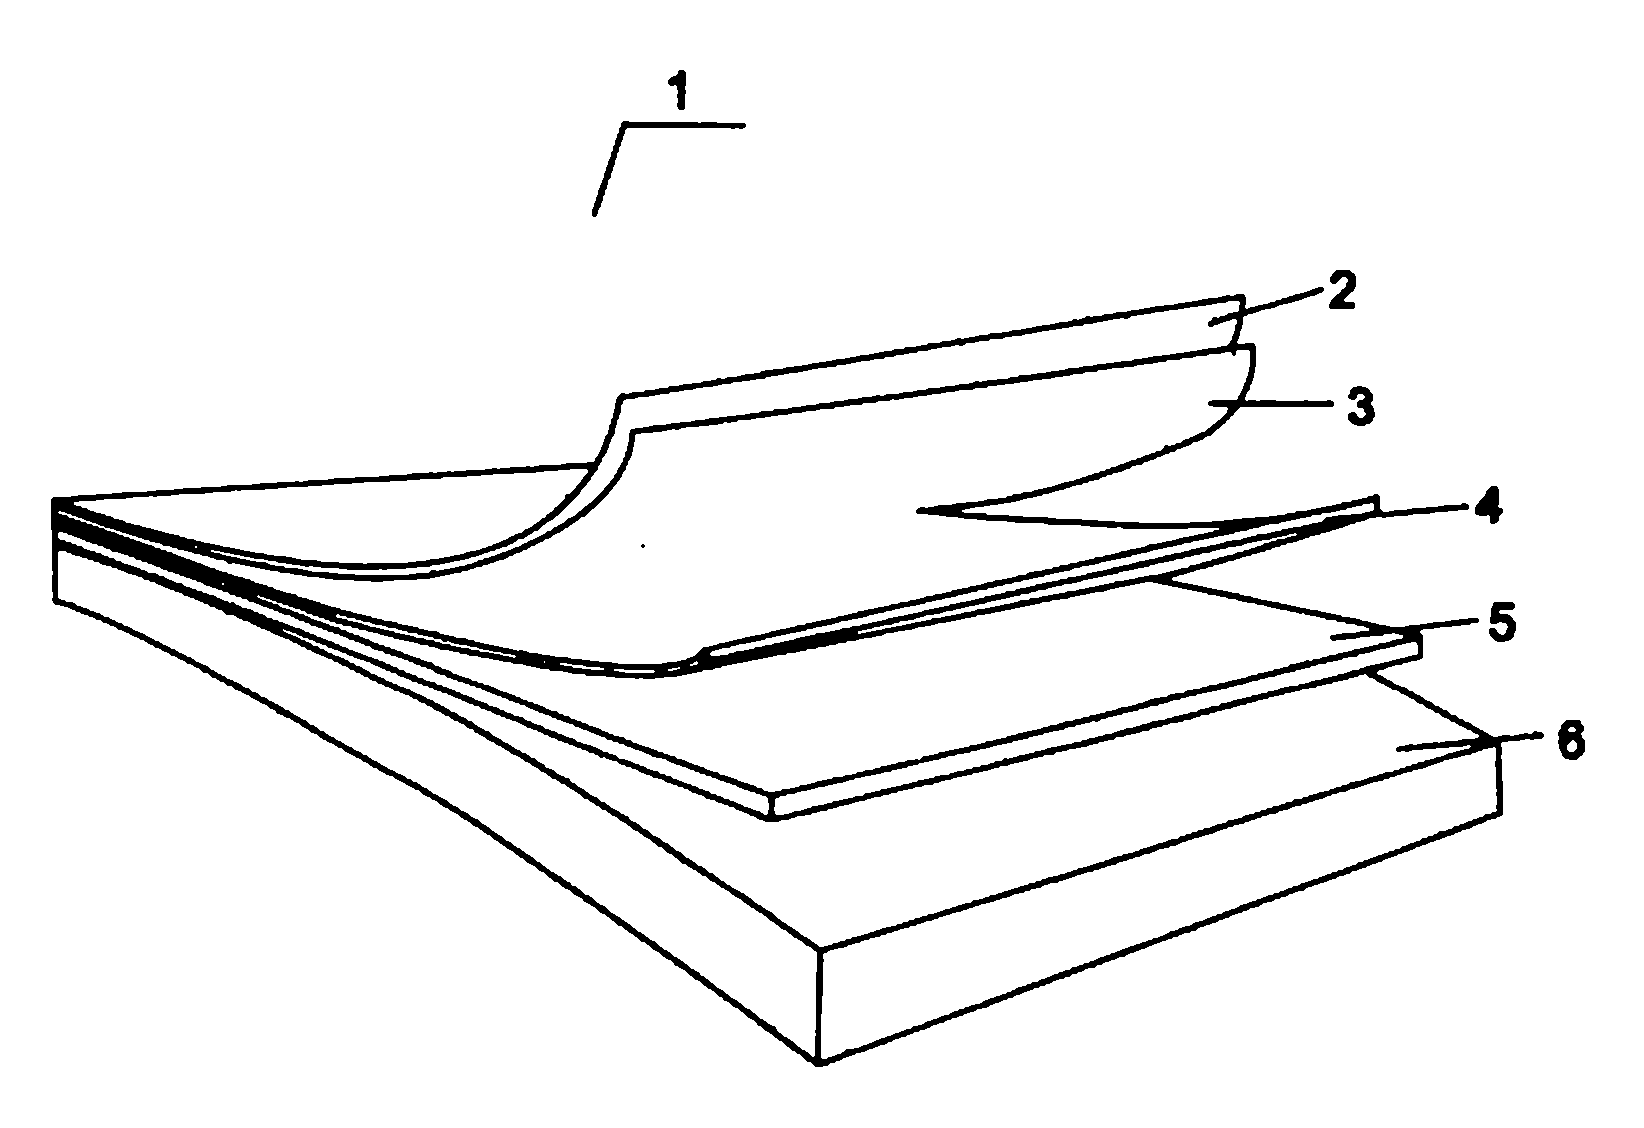 Method for fabricating PVC (polyvinyl chloride) color painted floor